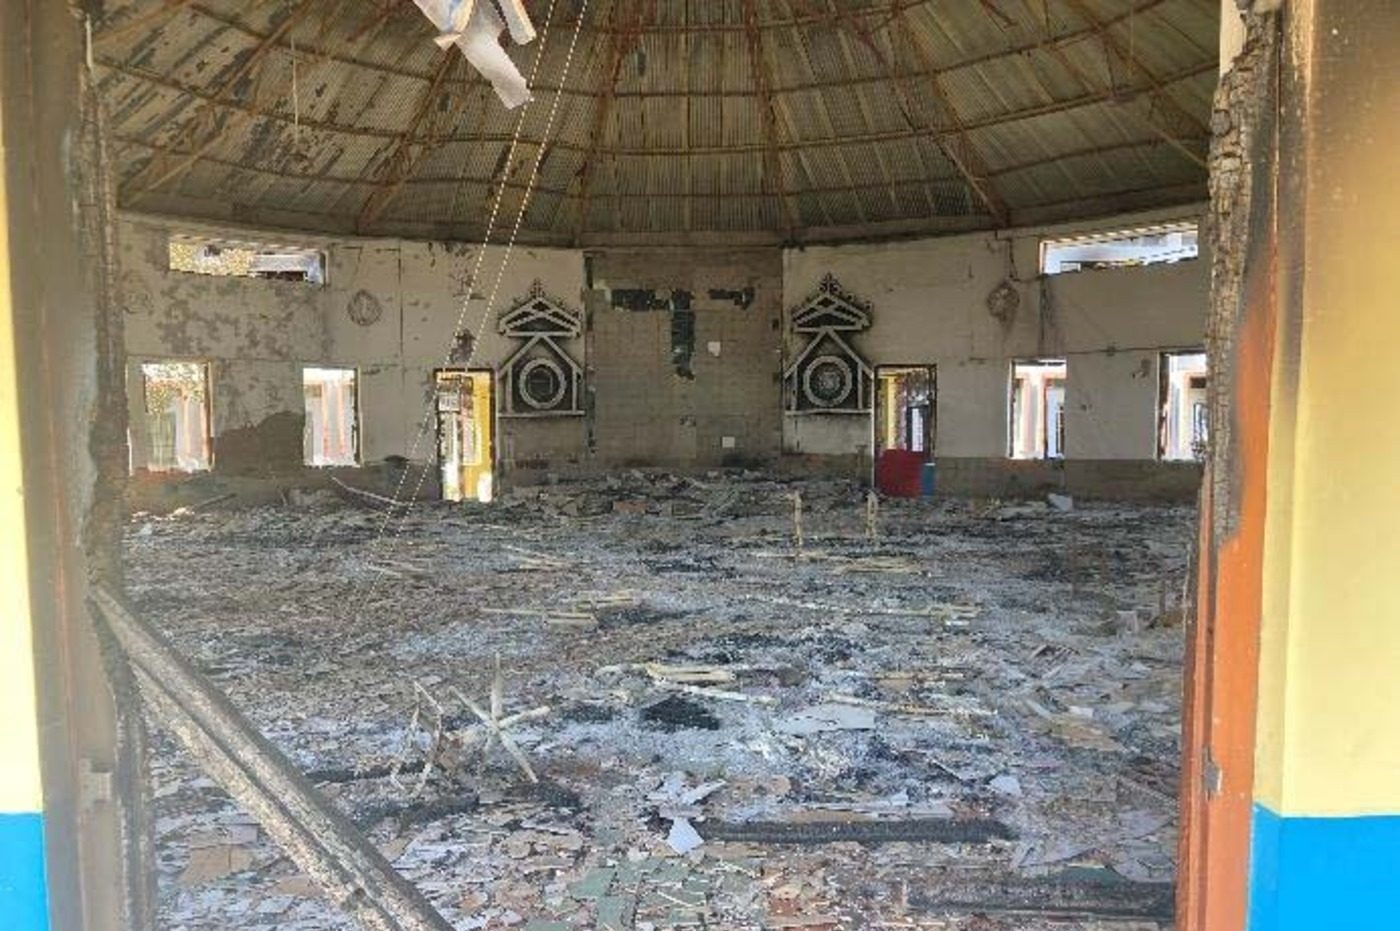 The aftermath of an arson attack on St Paul’s Parish and Pastoral Training Centre in Manipur.